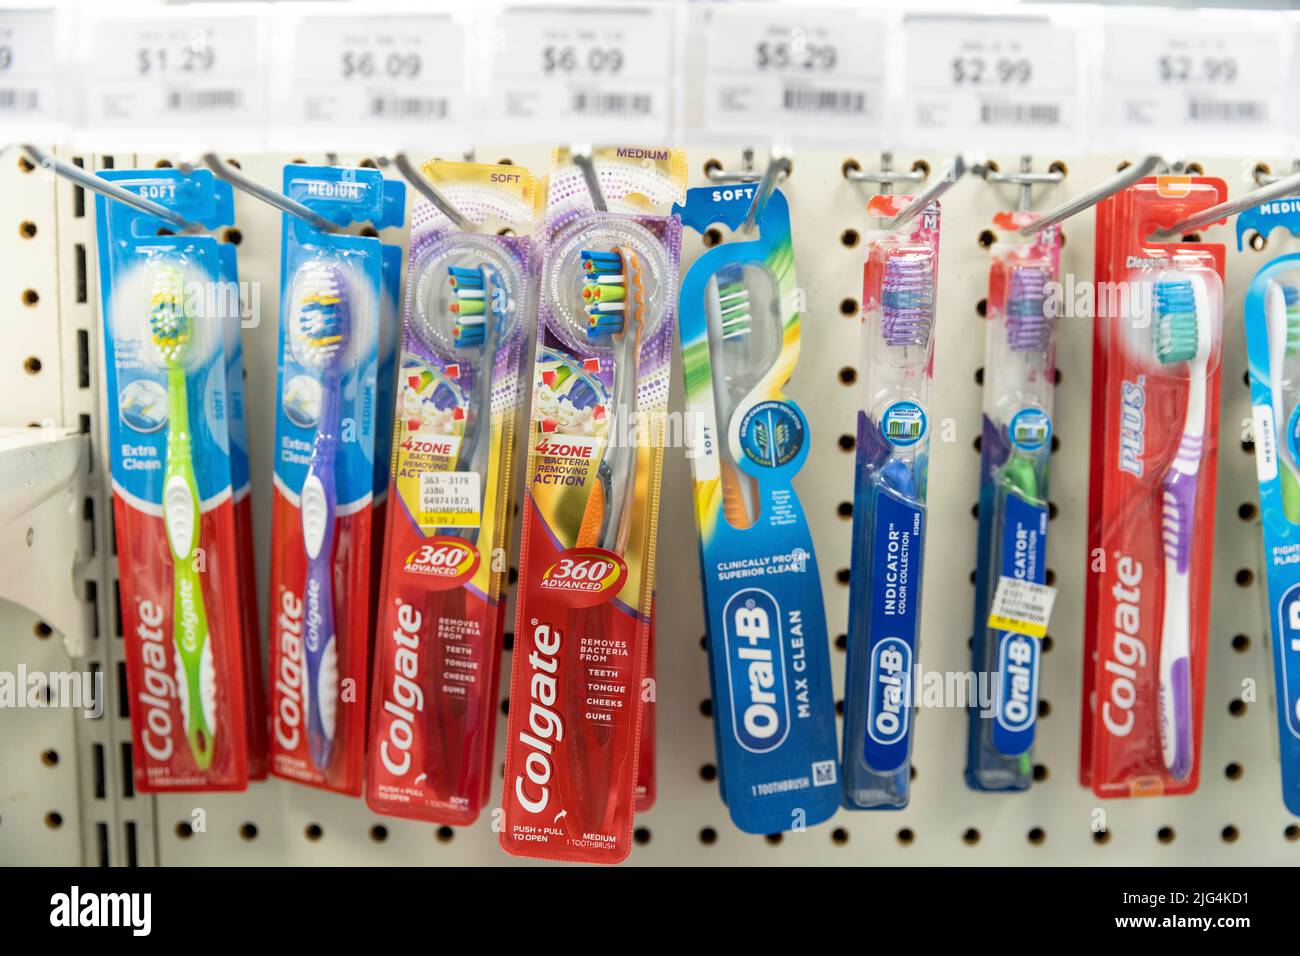 A row of Colgate and Oral B toothbrush packages hang on a display at a drug store Stock Photo